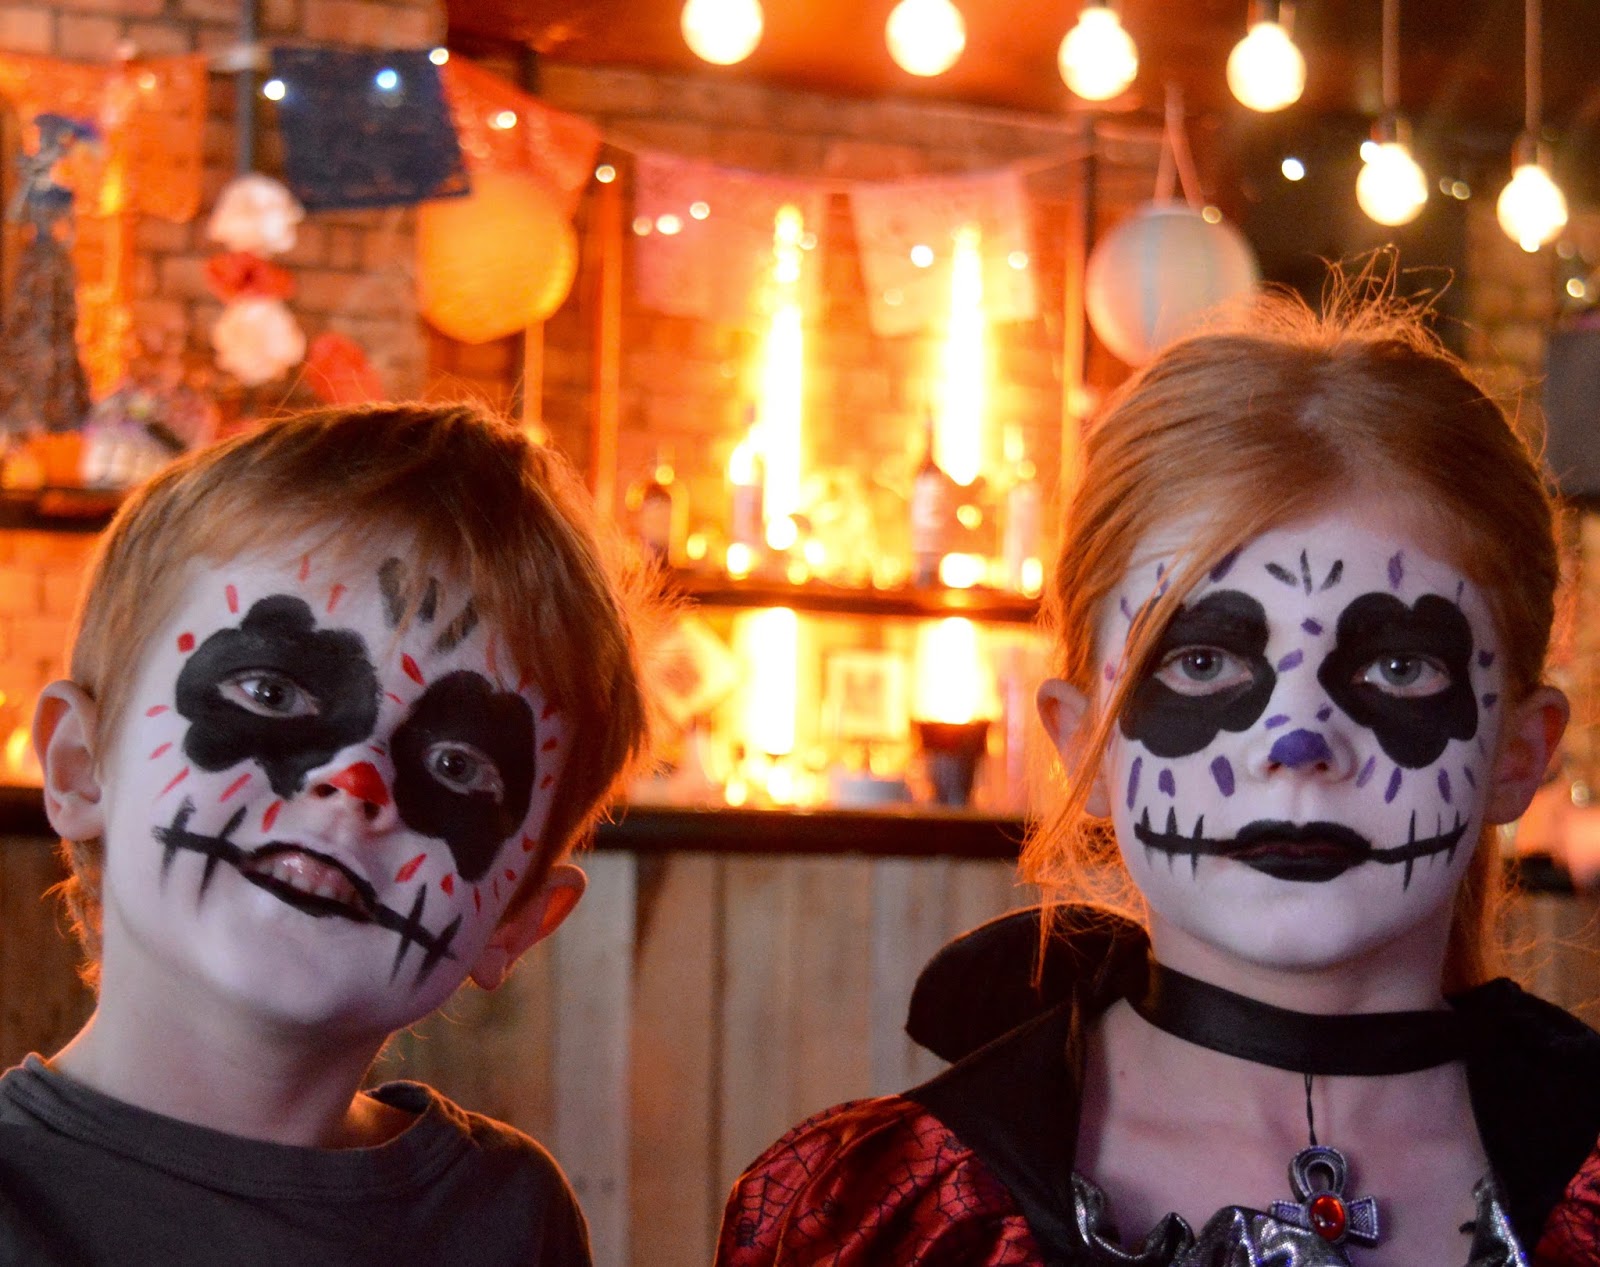 Juice Festival | Day of the Dead Family Celebrations at ¡Vamos! Social, Newcastle 